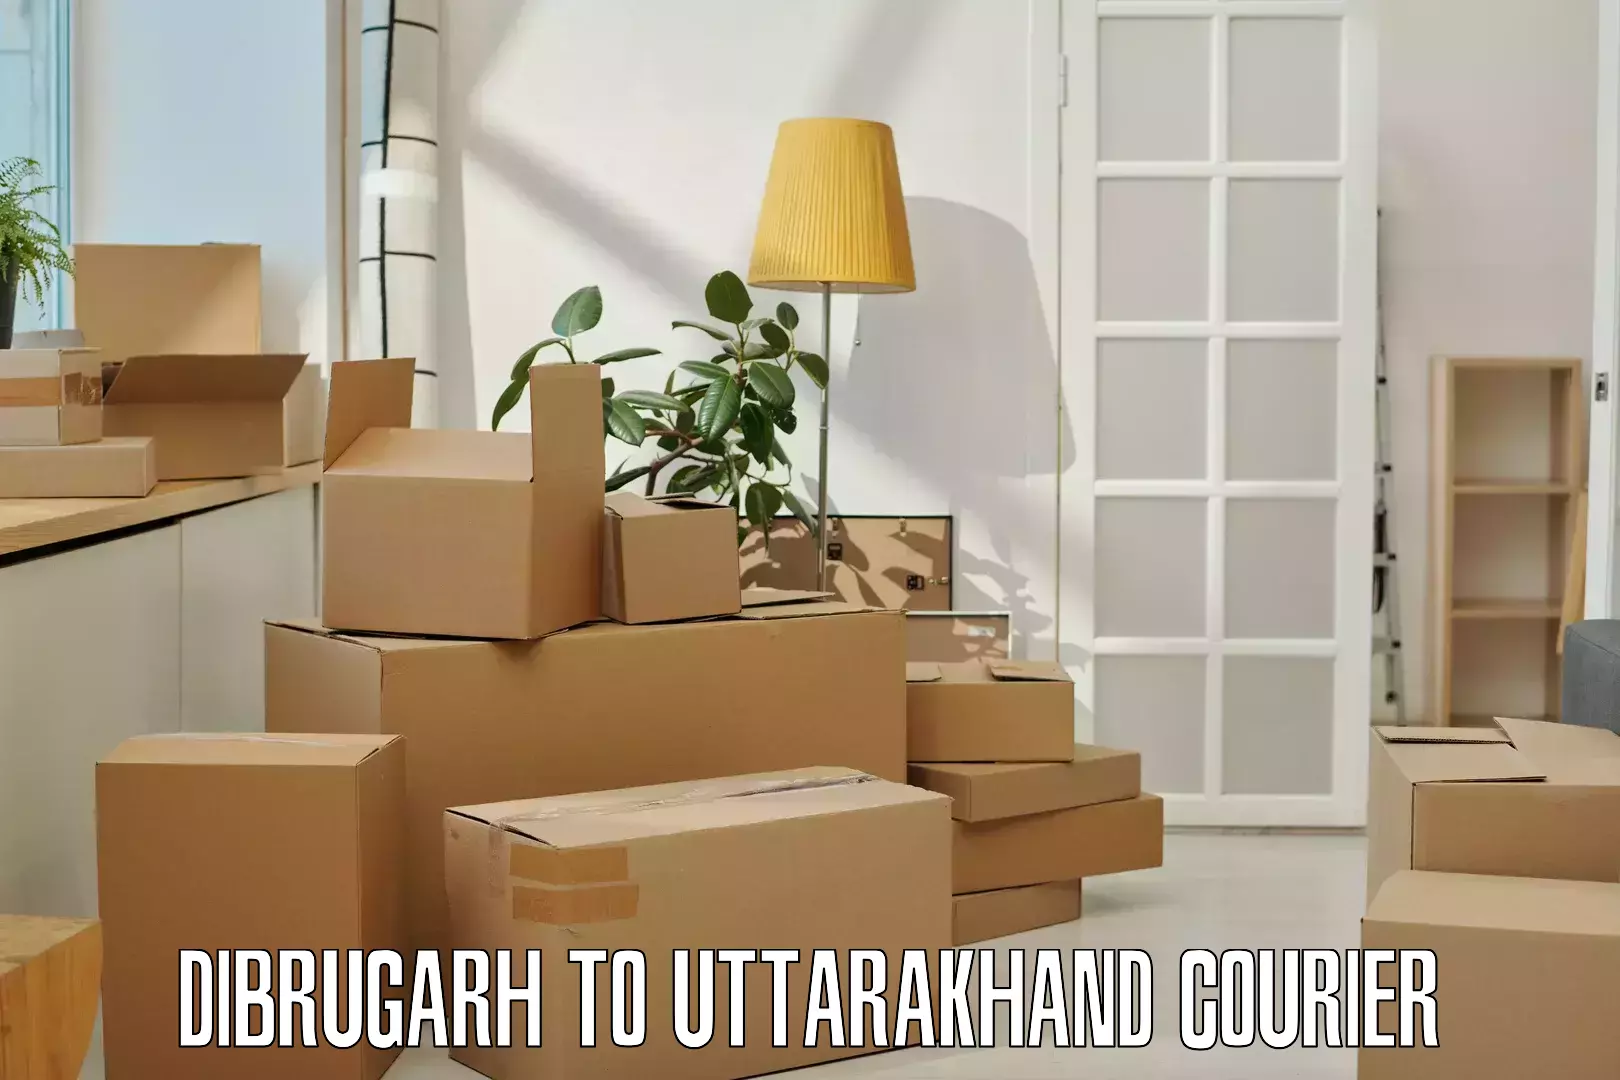 Round-the-clock parcel delivery Dibrugarh to Roorkee